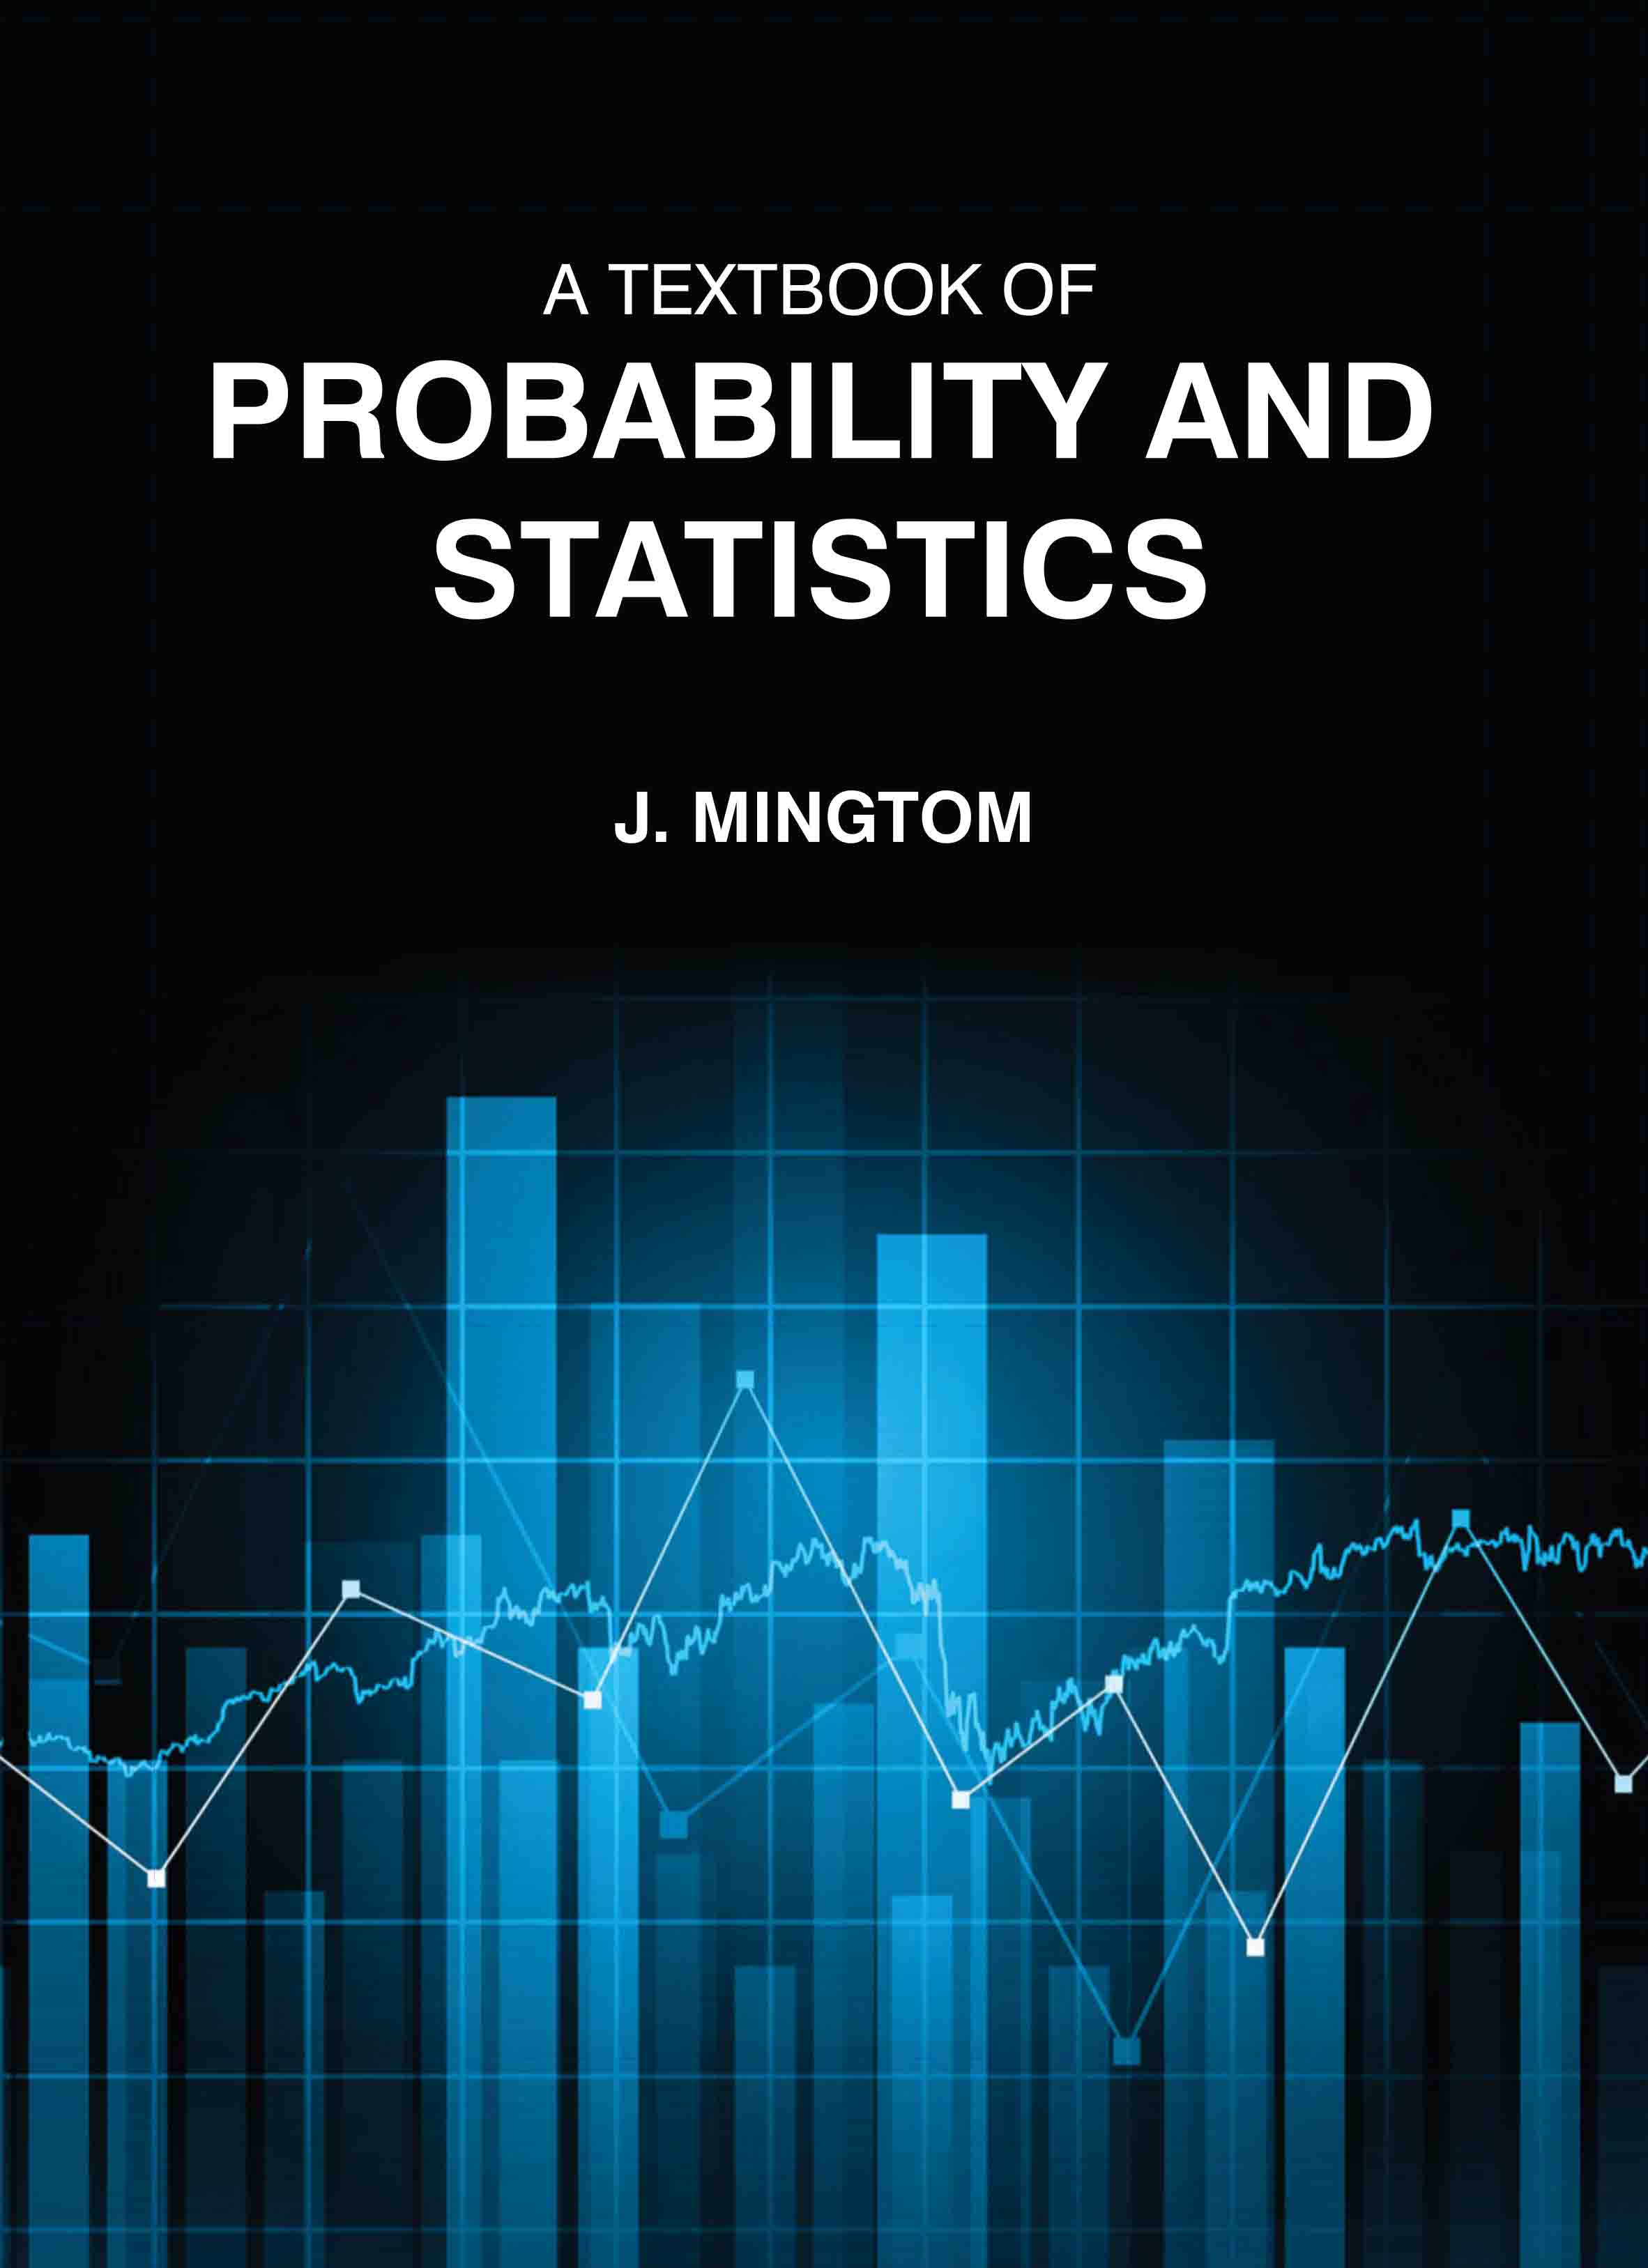 A Textbook of Probability and Statistics